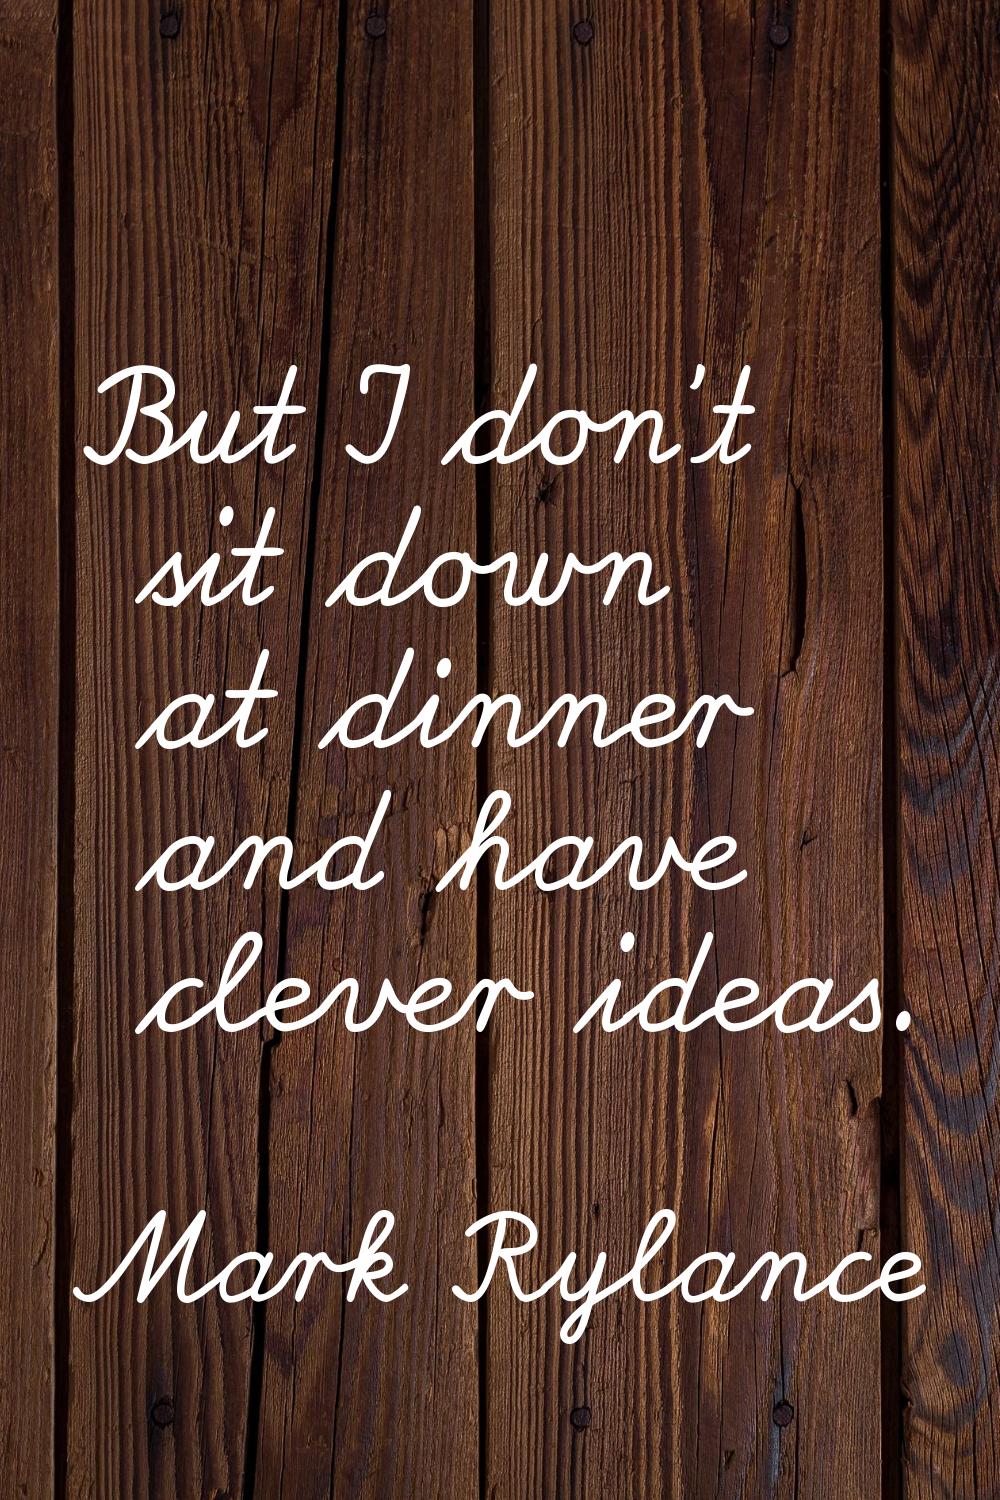 But I don't sit down at dinner and have clever ideas.